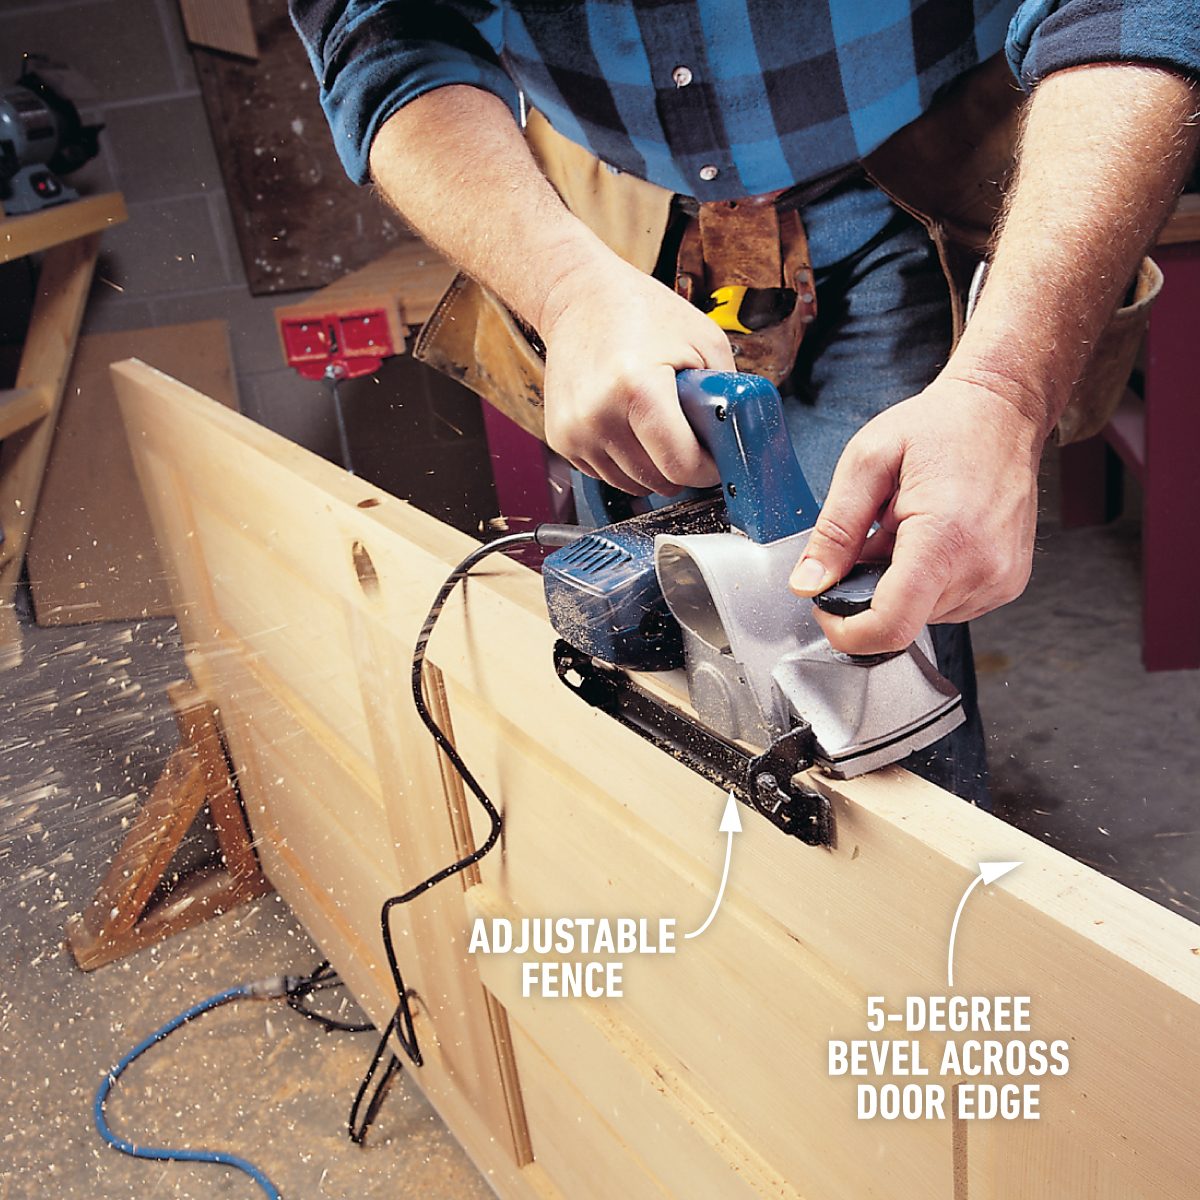 How To Use an Electric Planer Plane a door edge so it'll close easily